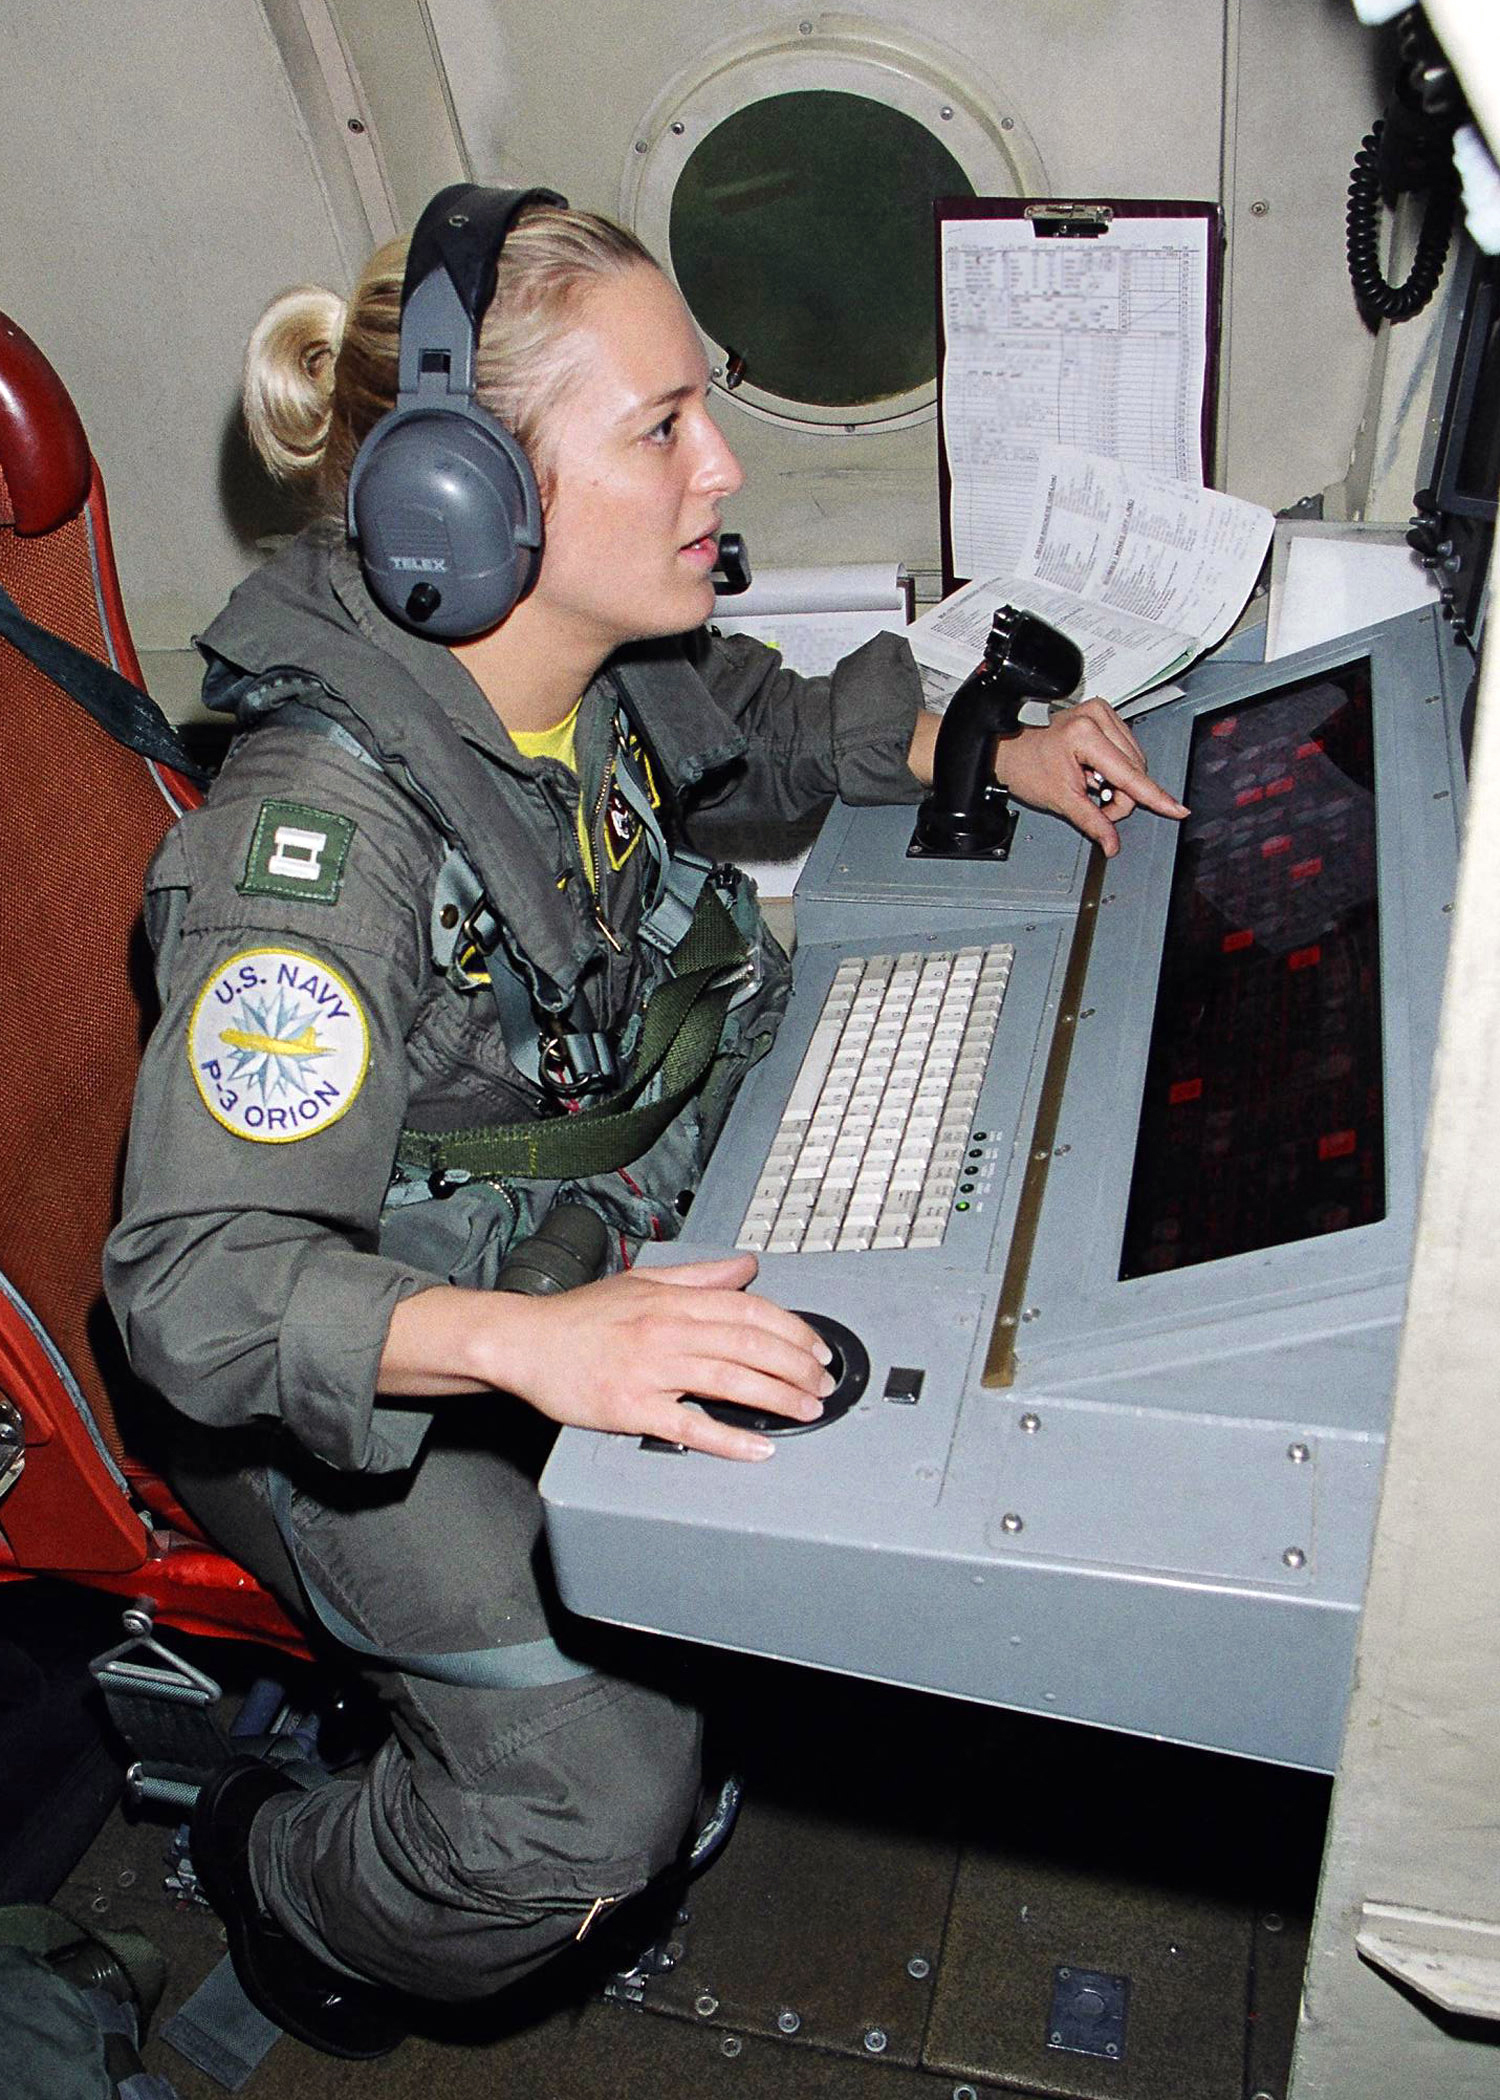 US Navy 030508-N-0020T-005 Lt. Kososki operates the tactical coordinator (TACCO) station 